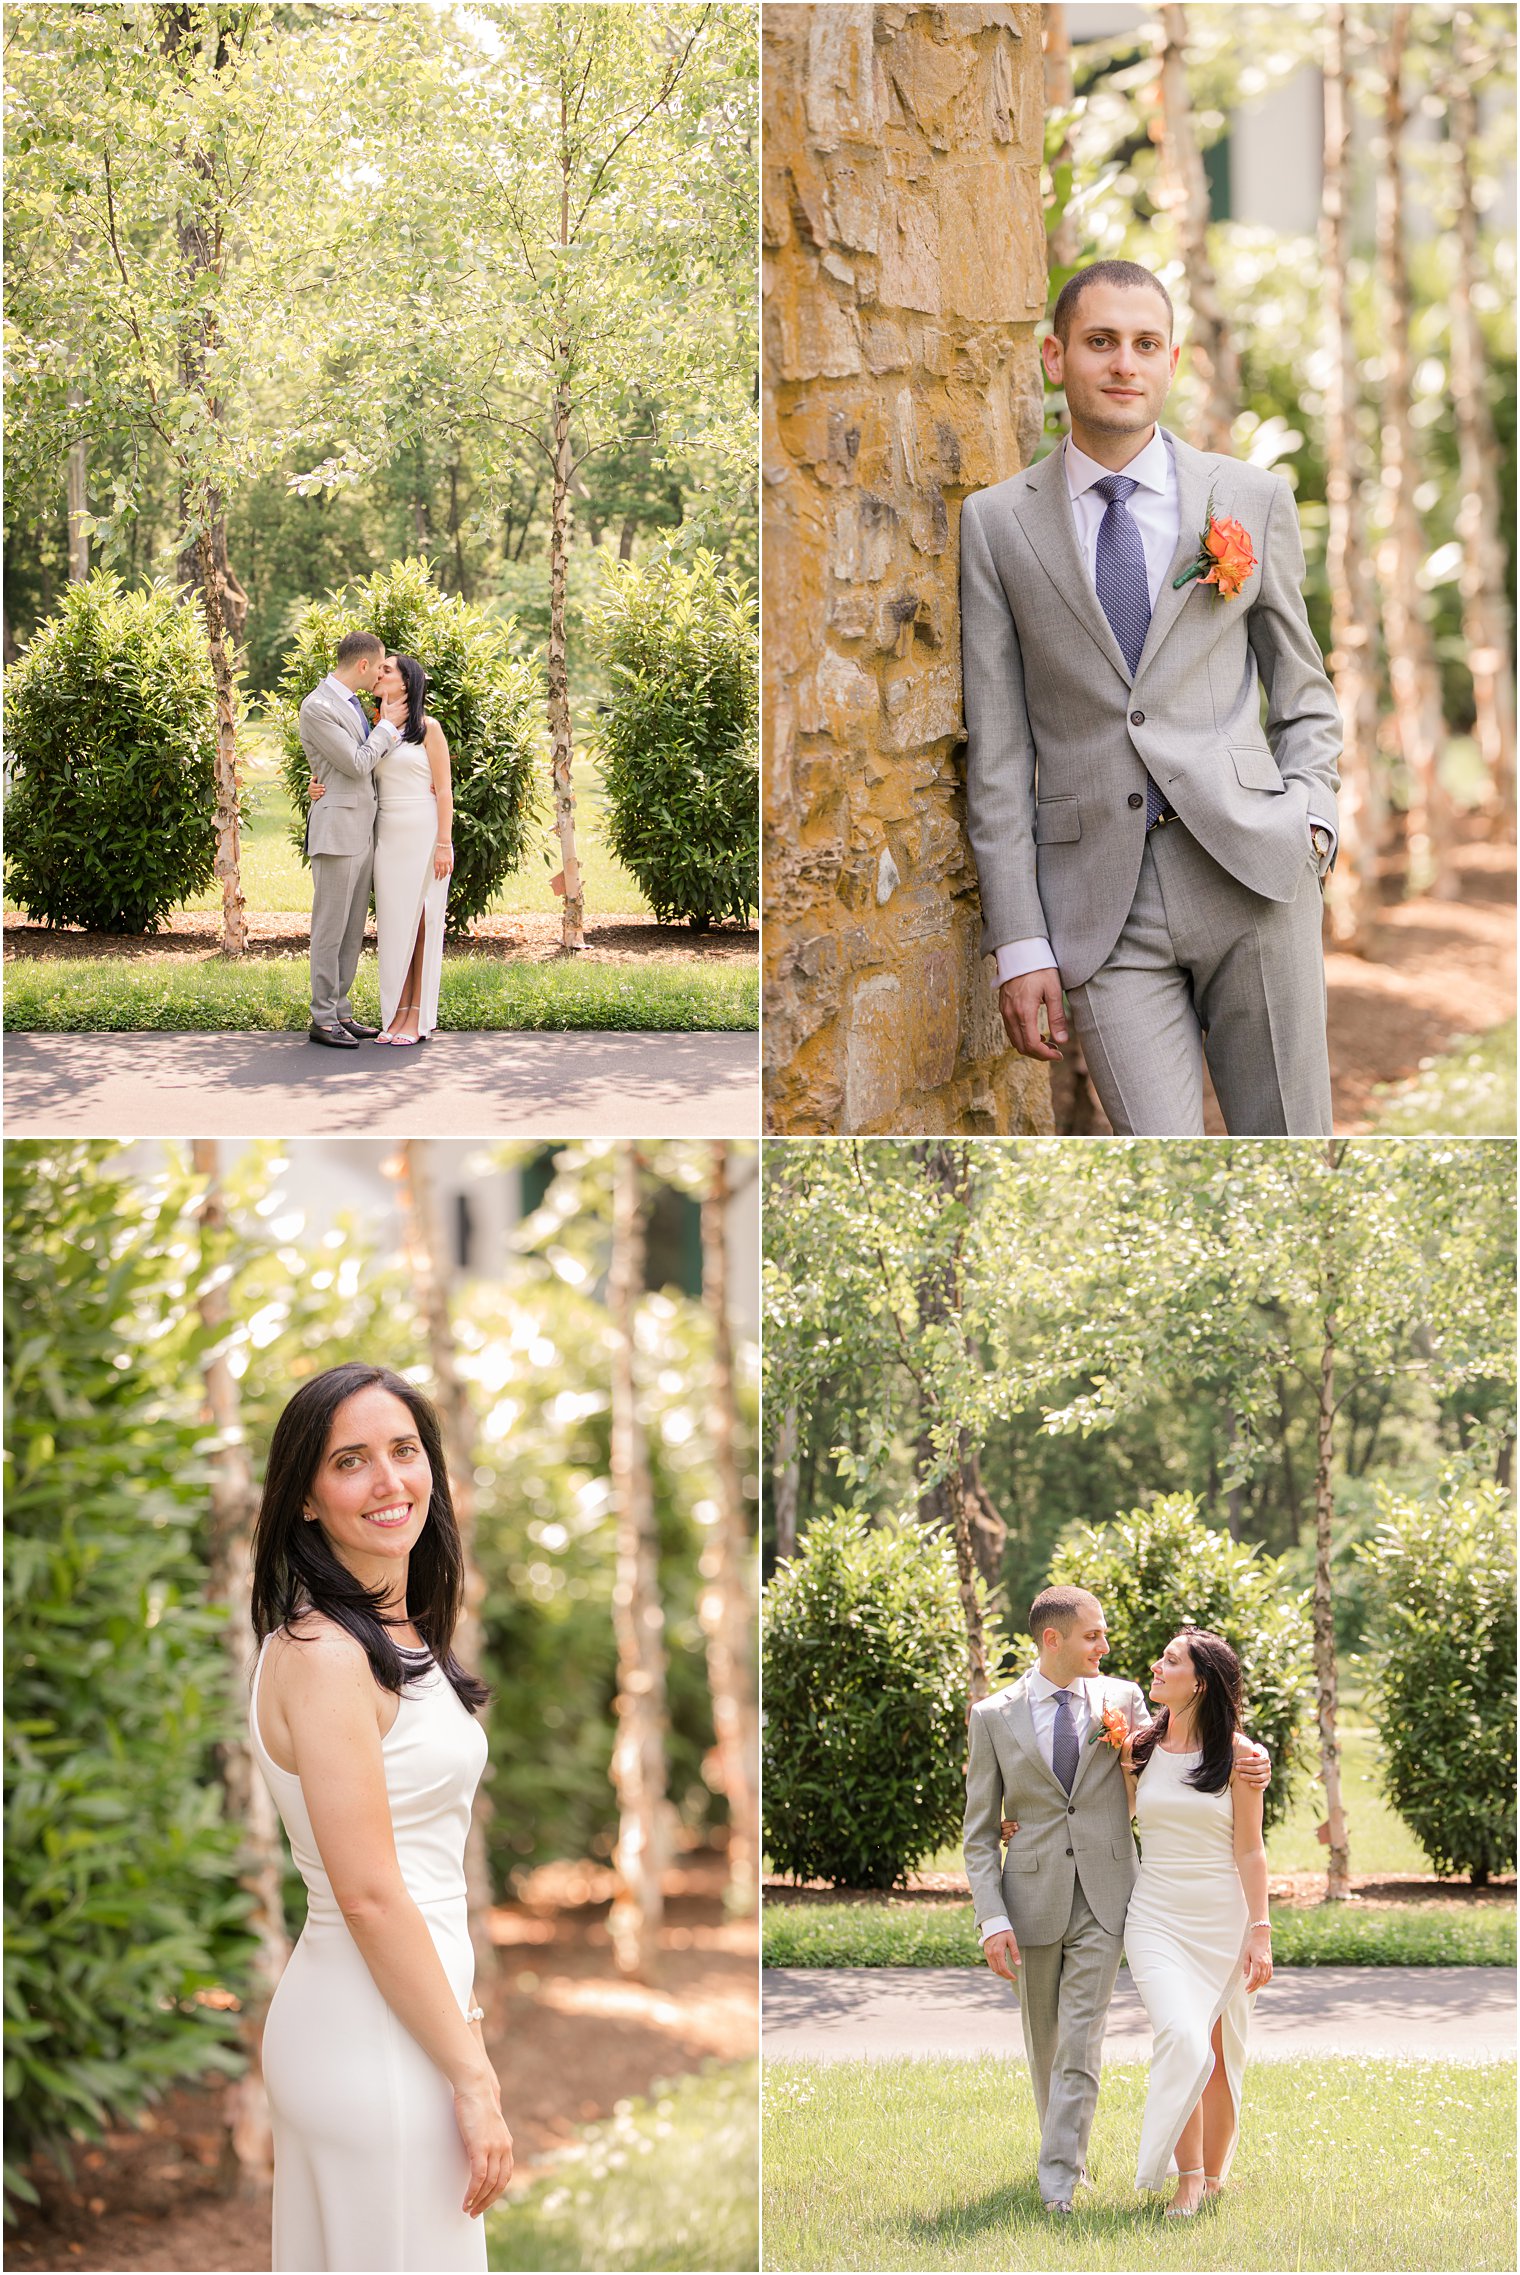 Wedding portraits in unique New Hope PA location